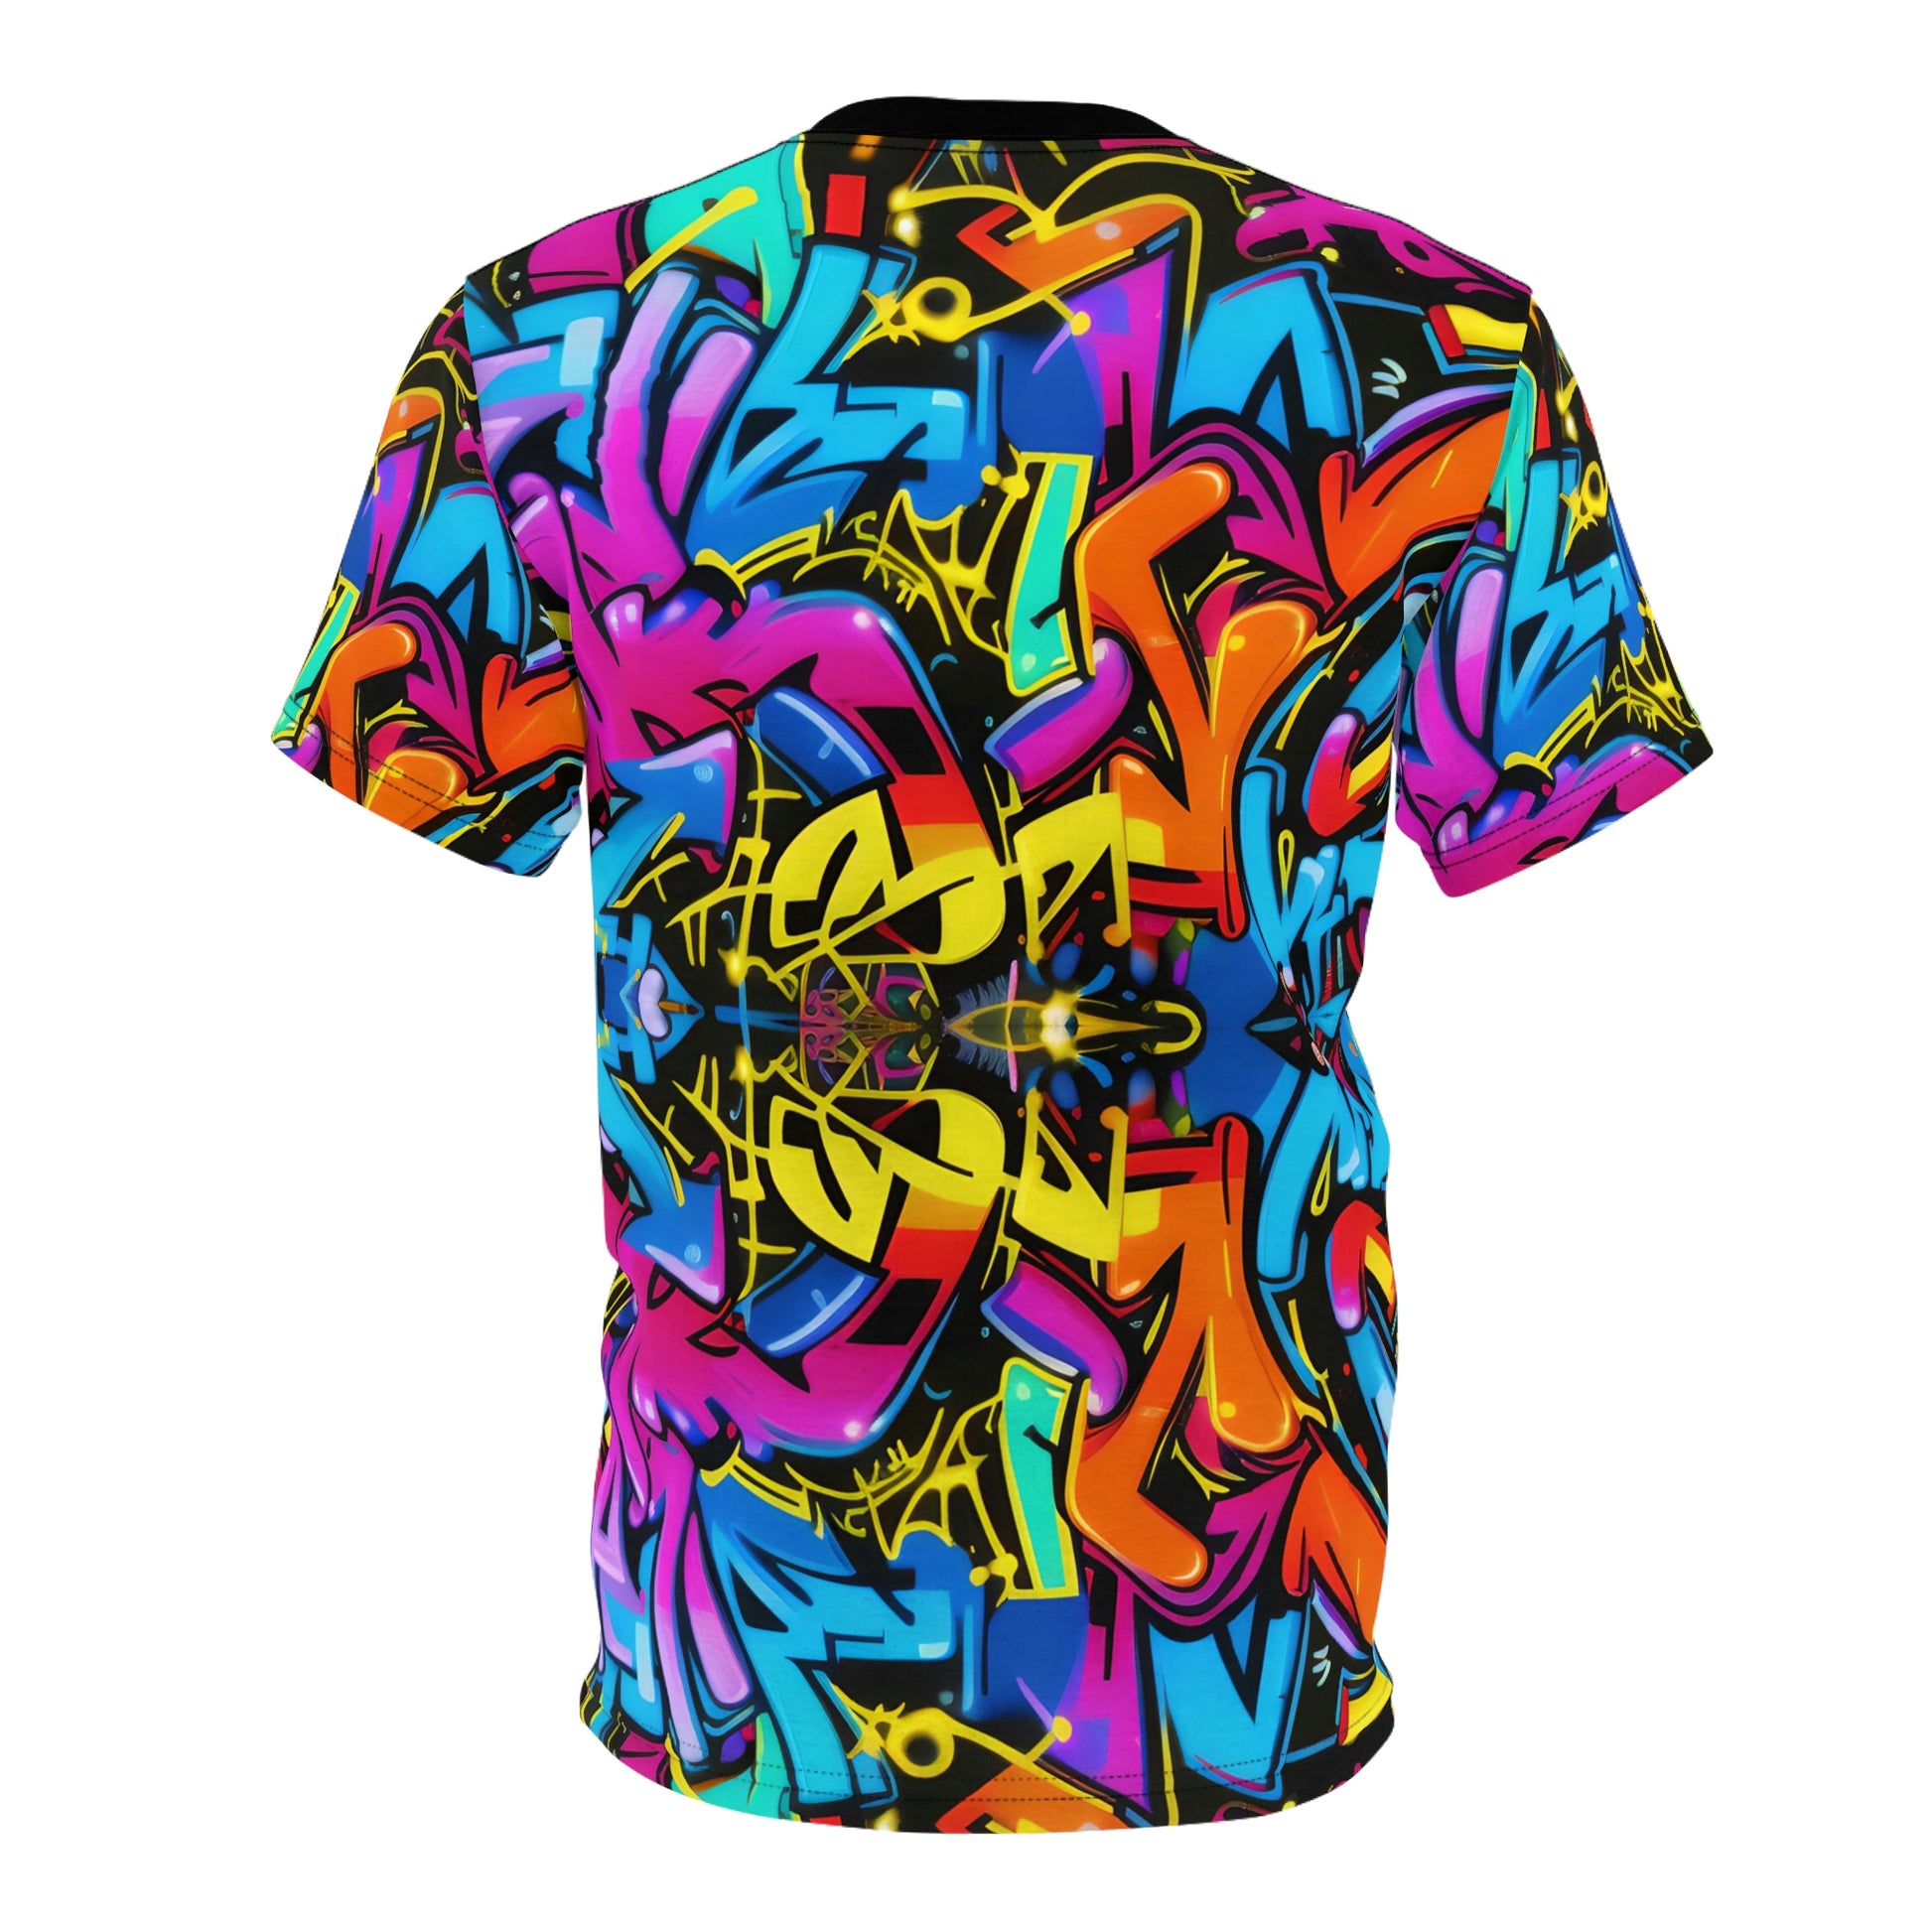 https://admin.shopify.com/store/d7654e/themes/147717095744/editor?previewPath=%2Fcollections%2Fprinted-shirts%2Fproducts%2F4th-of-july-style-abstract-style-unisex-cut-sew-tee-5